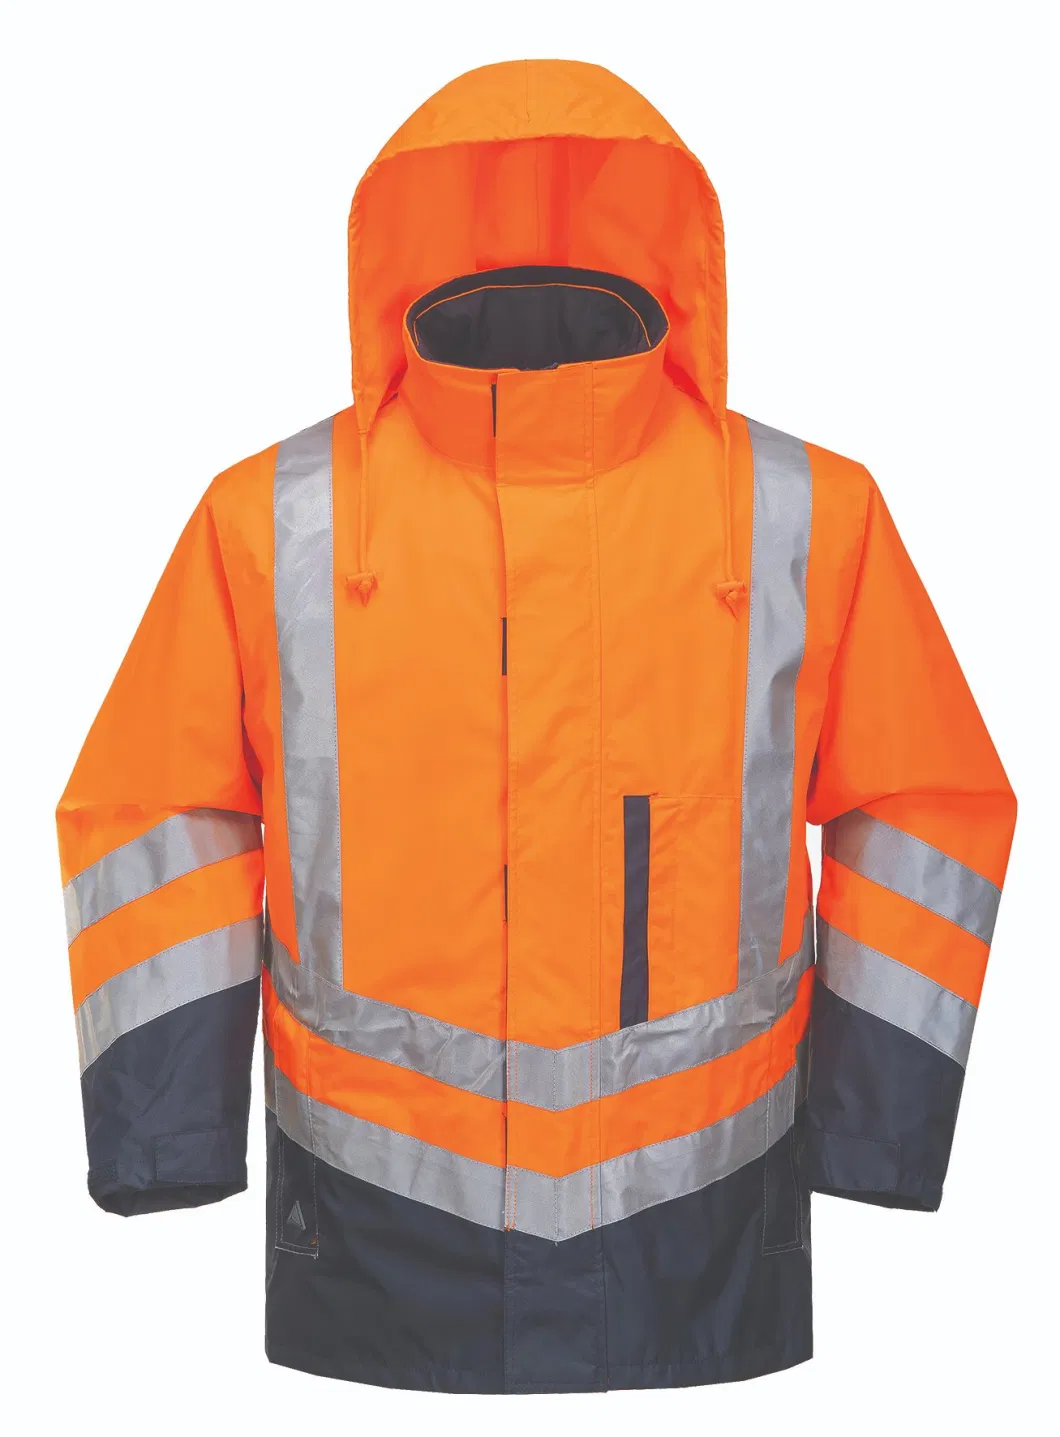 Wholesale High Visibility Waterproof Winter Work Jacket Fire Resistant Anti-Static Clothing